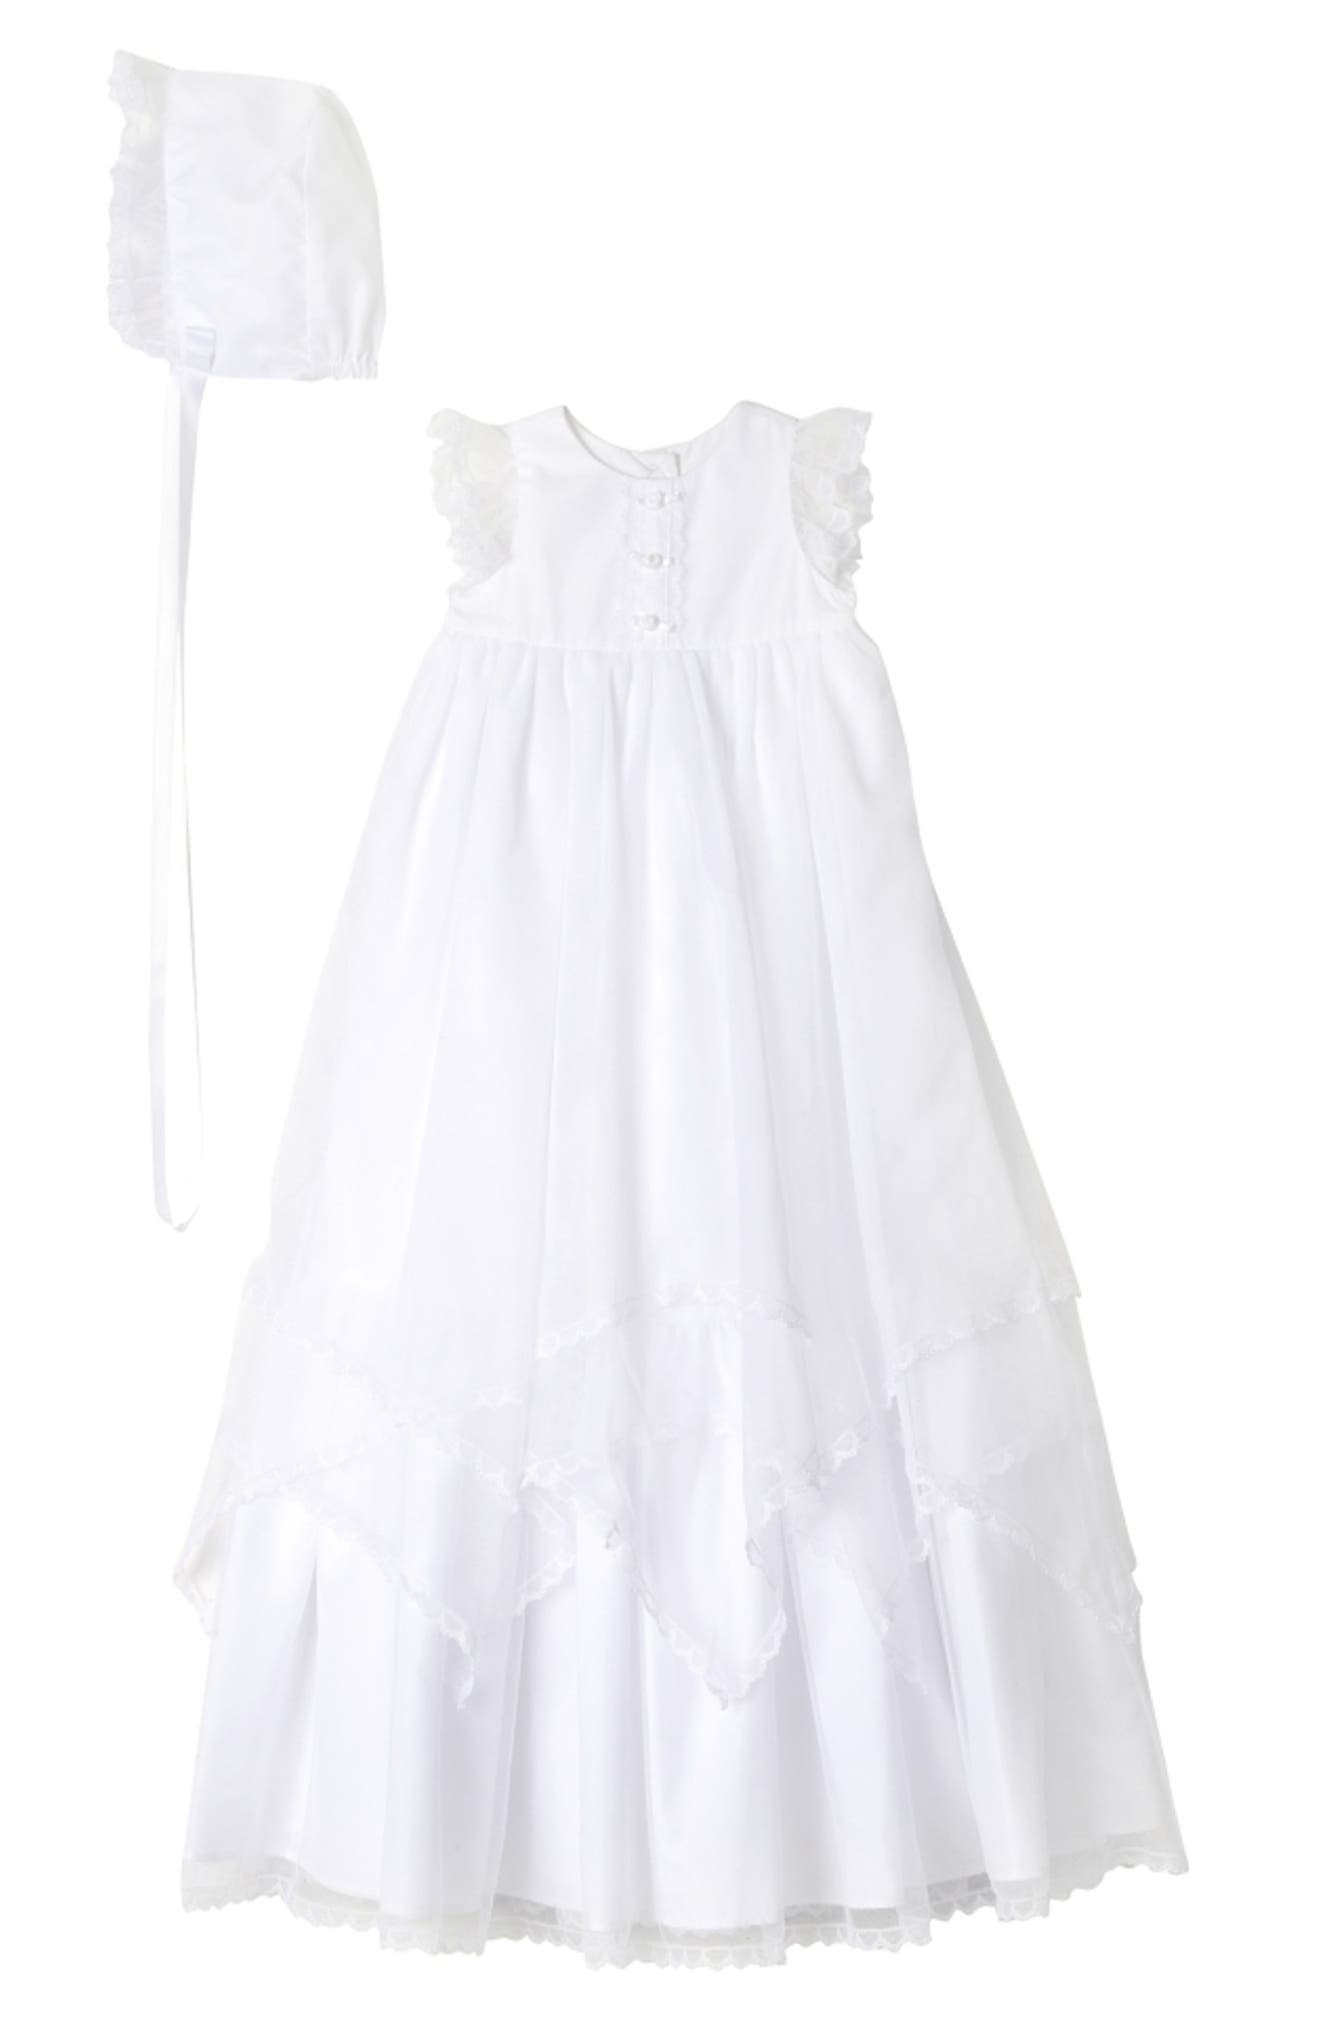 christening clothes for baby